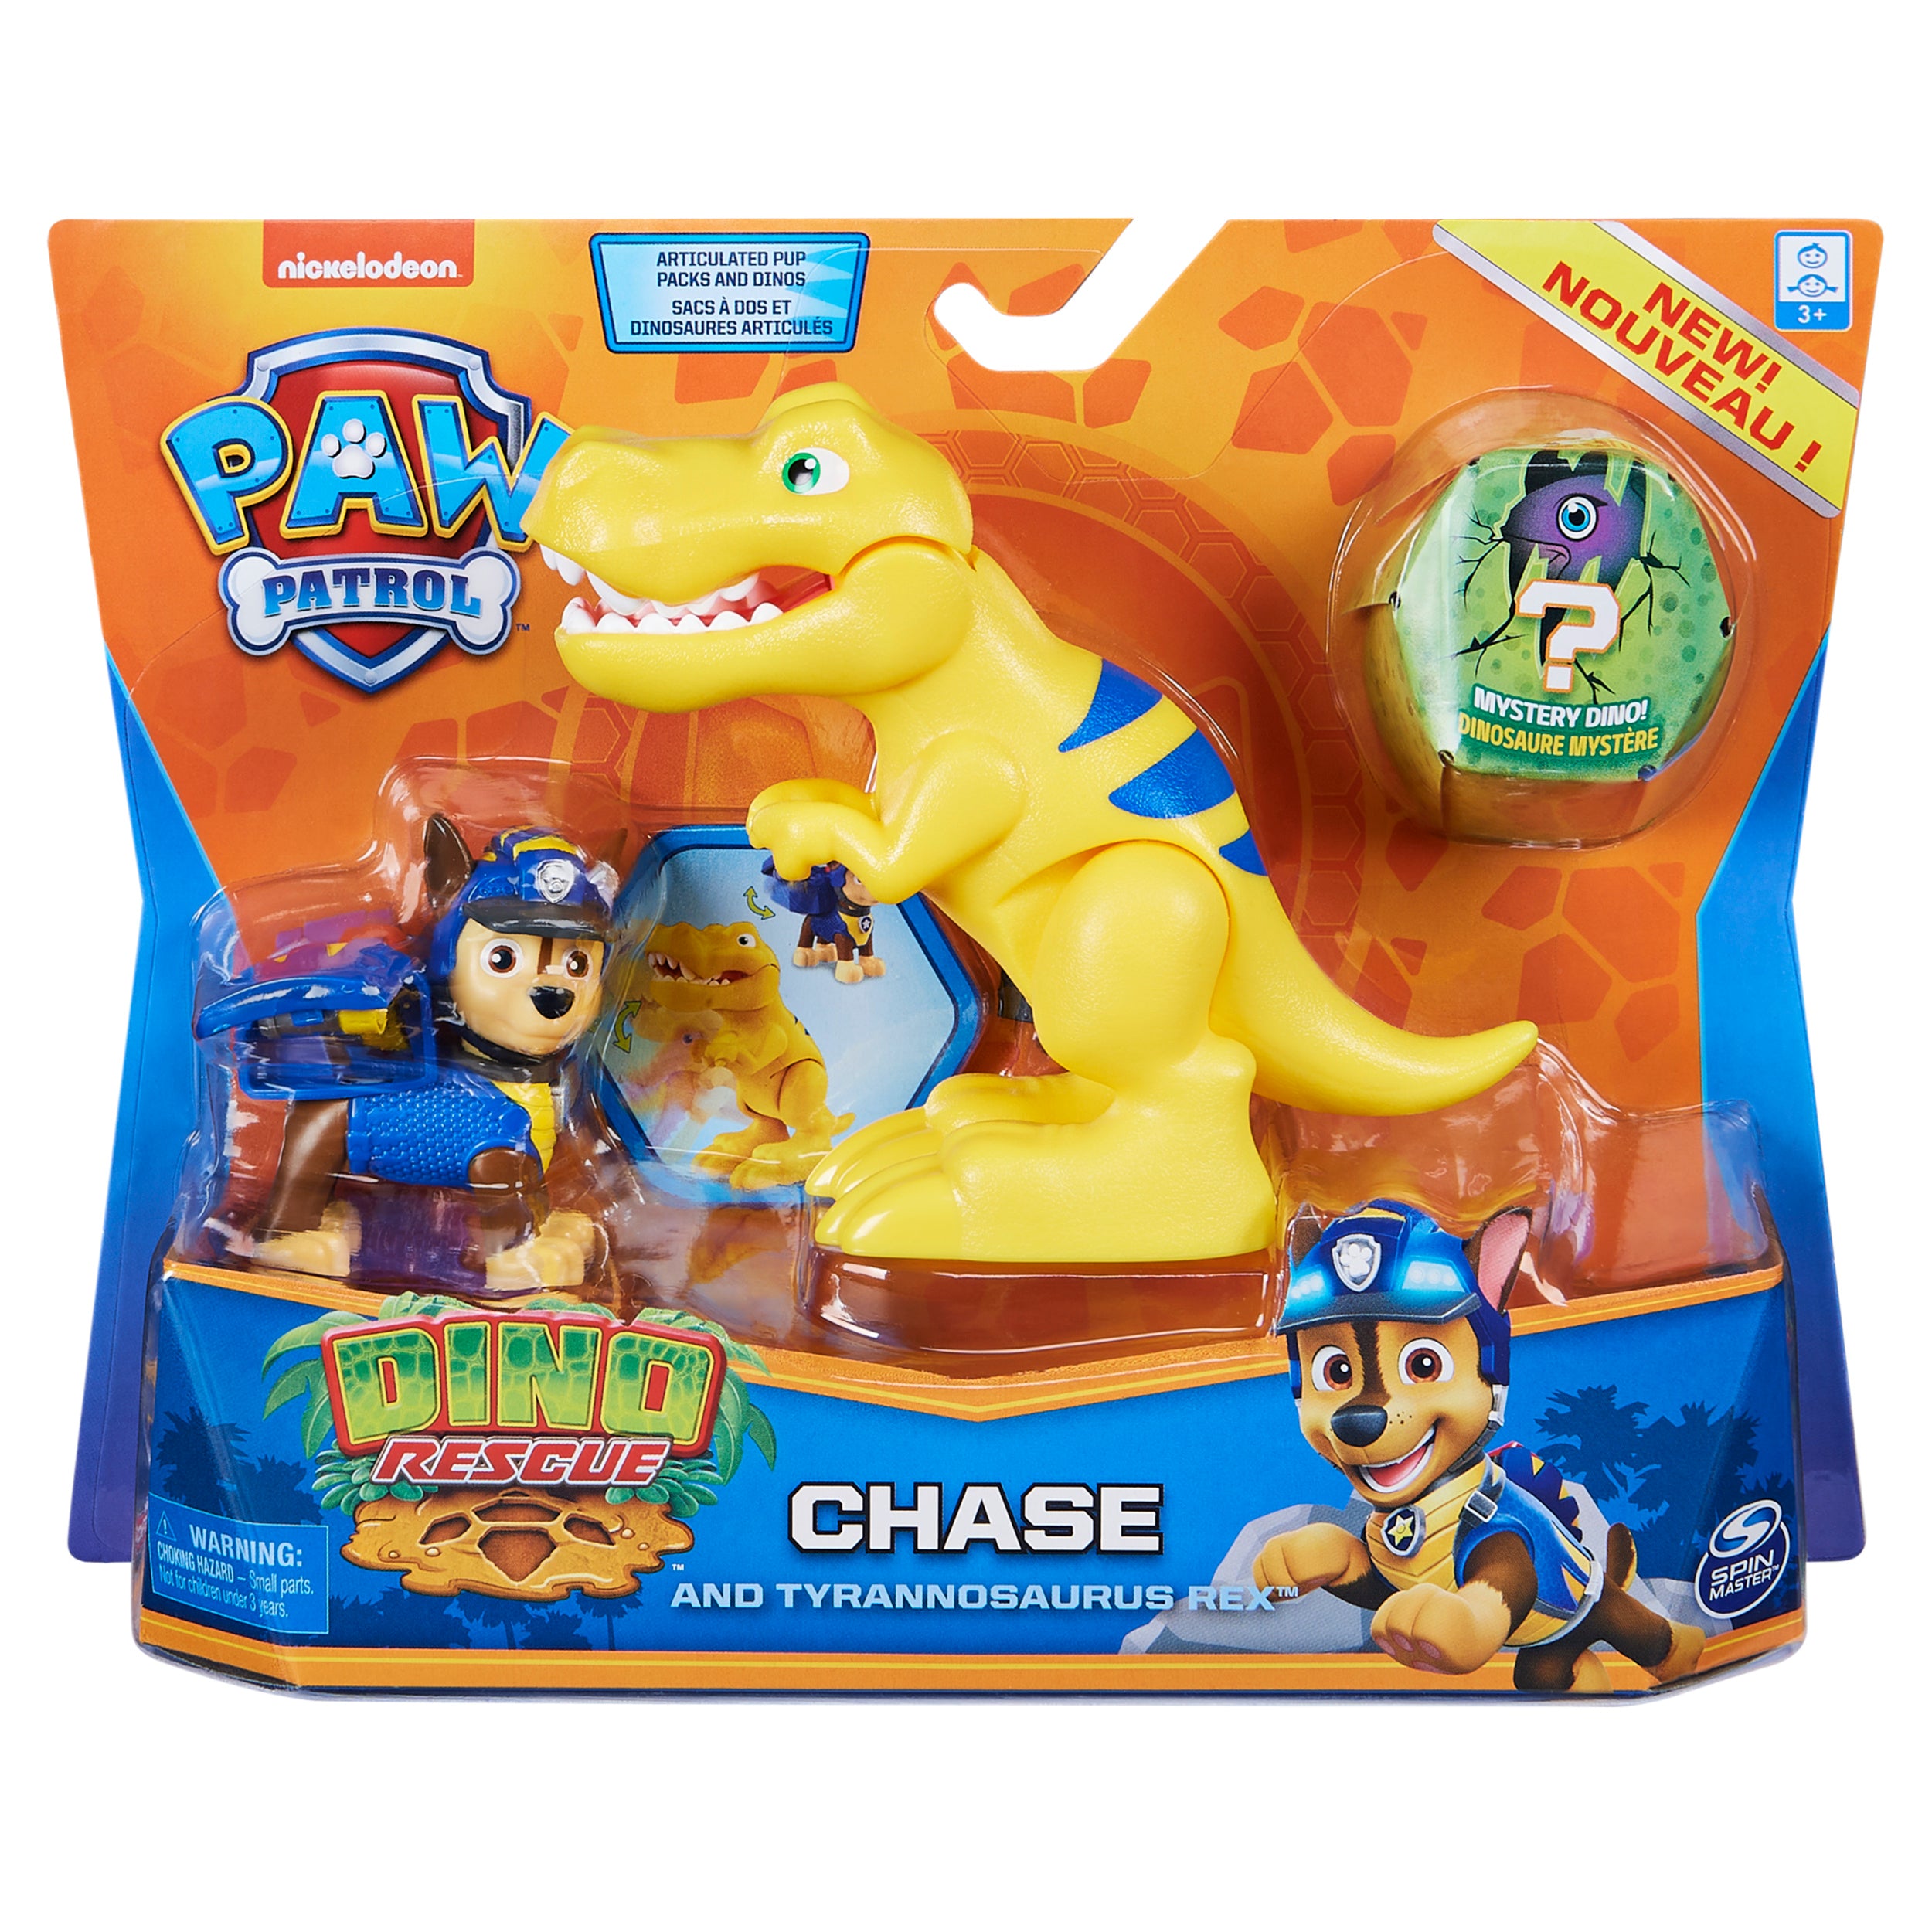 PAW Patrol, Dino Rescue Dinosaur Action Figure Set, for Kids Aged